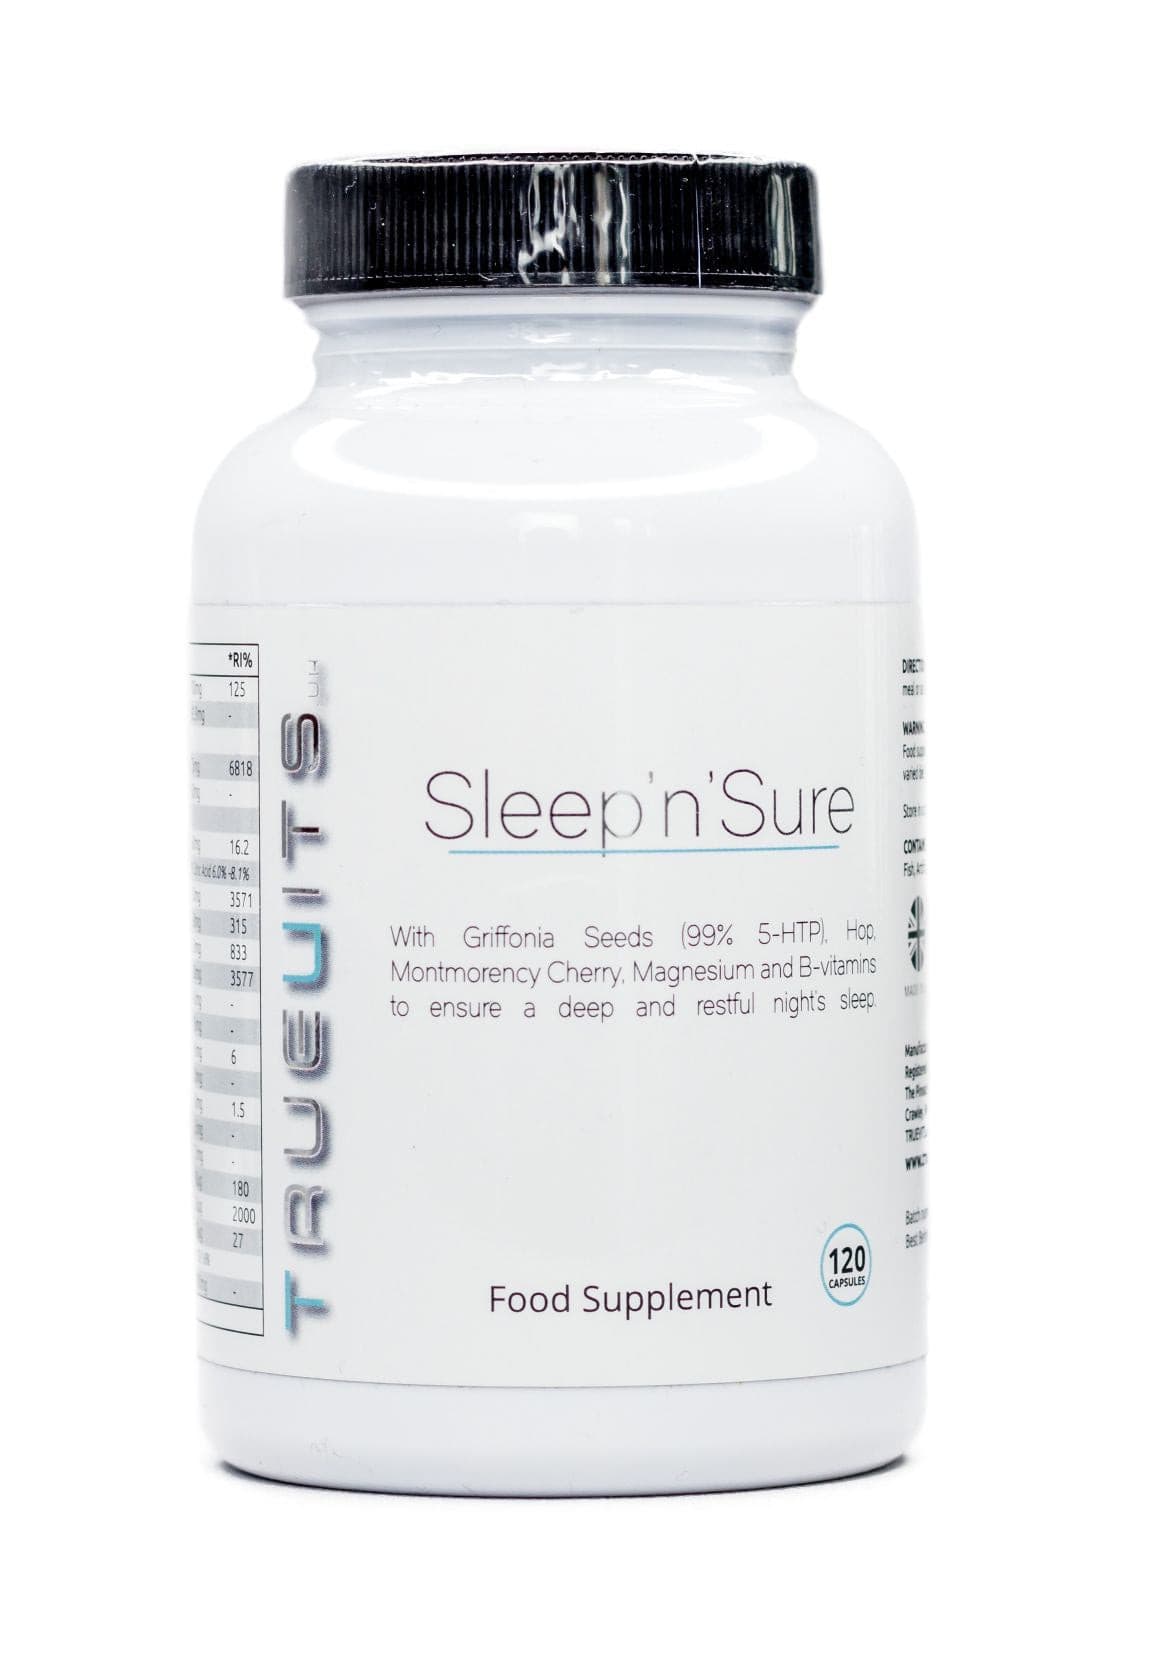 Sleep Sure - natural jet lag remedy with 5-HTP to relax and ease mental stress, B vitamins to regulate sleep-wake pattern. Best supplement for insomnia